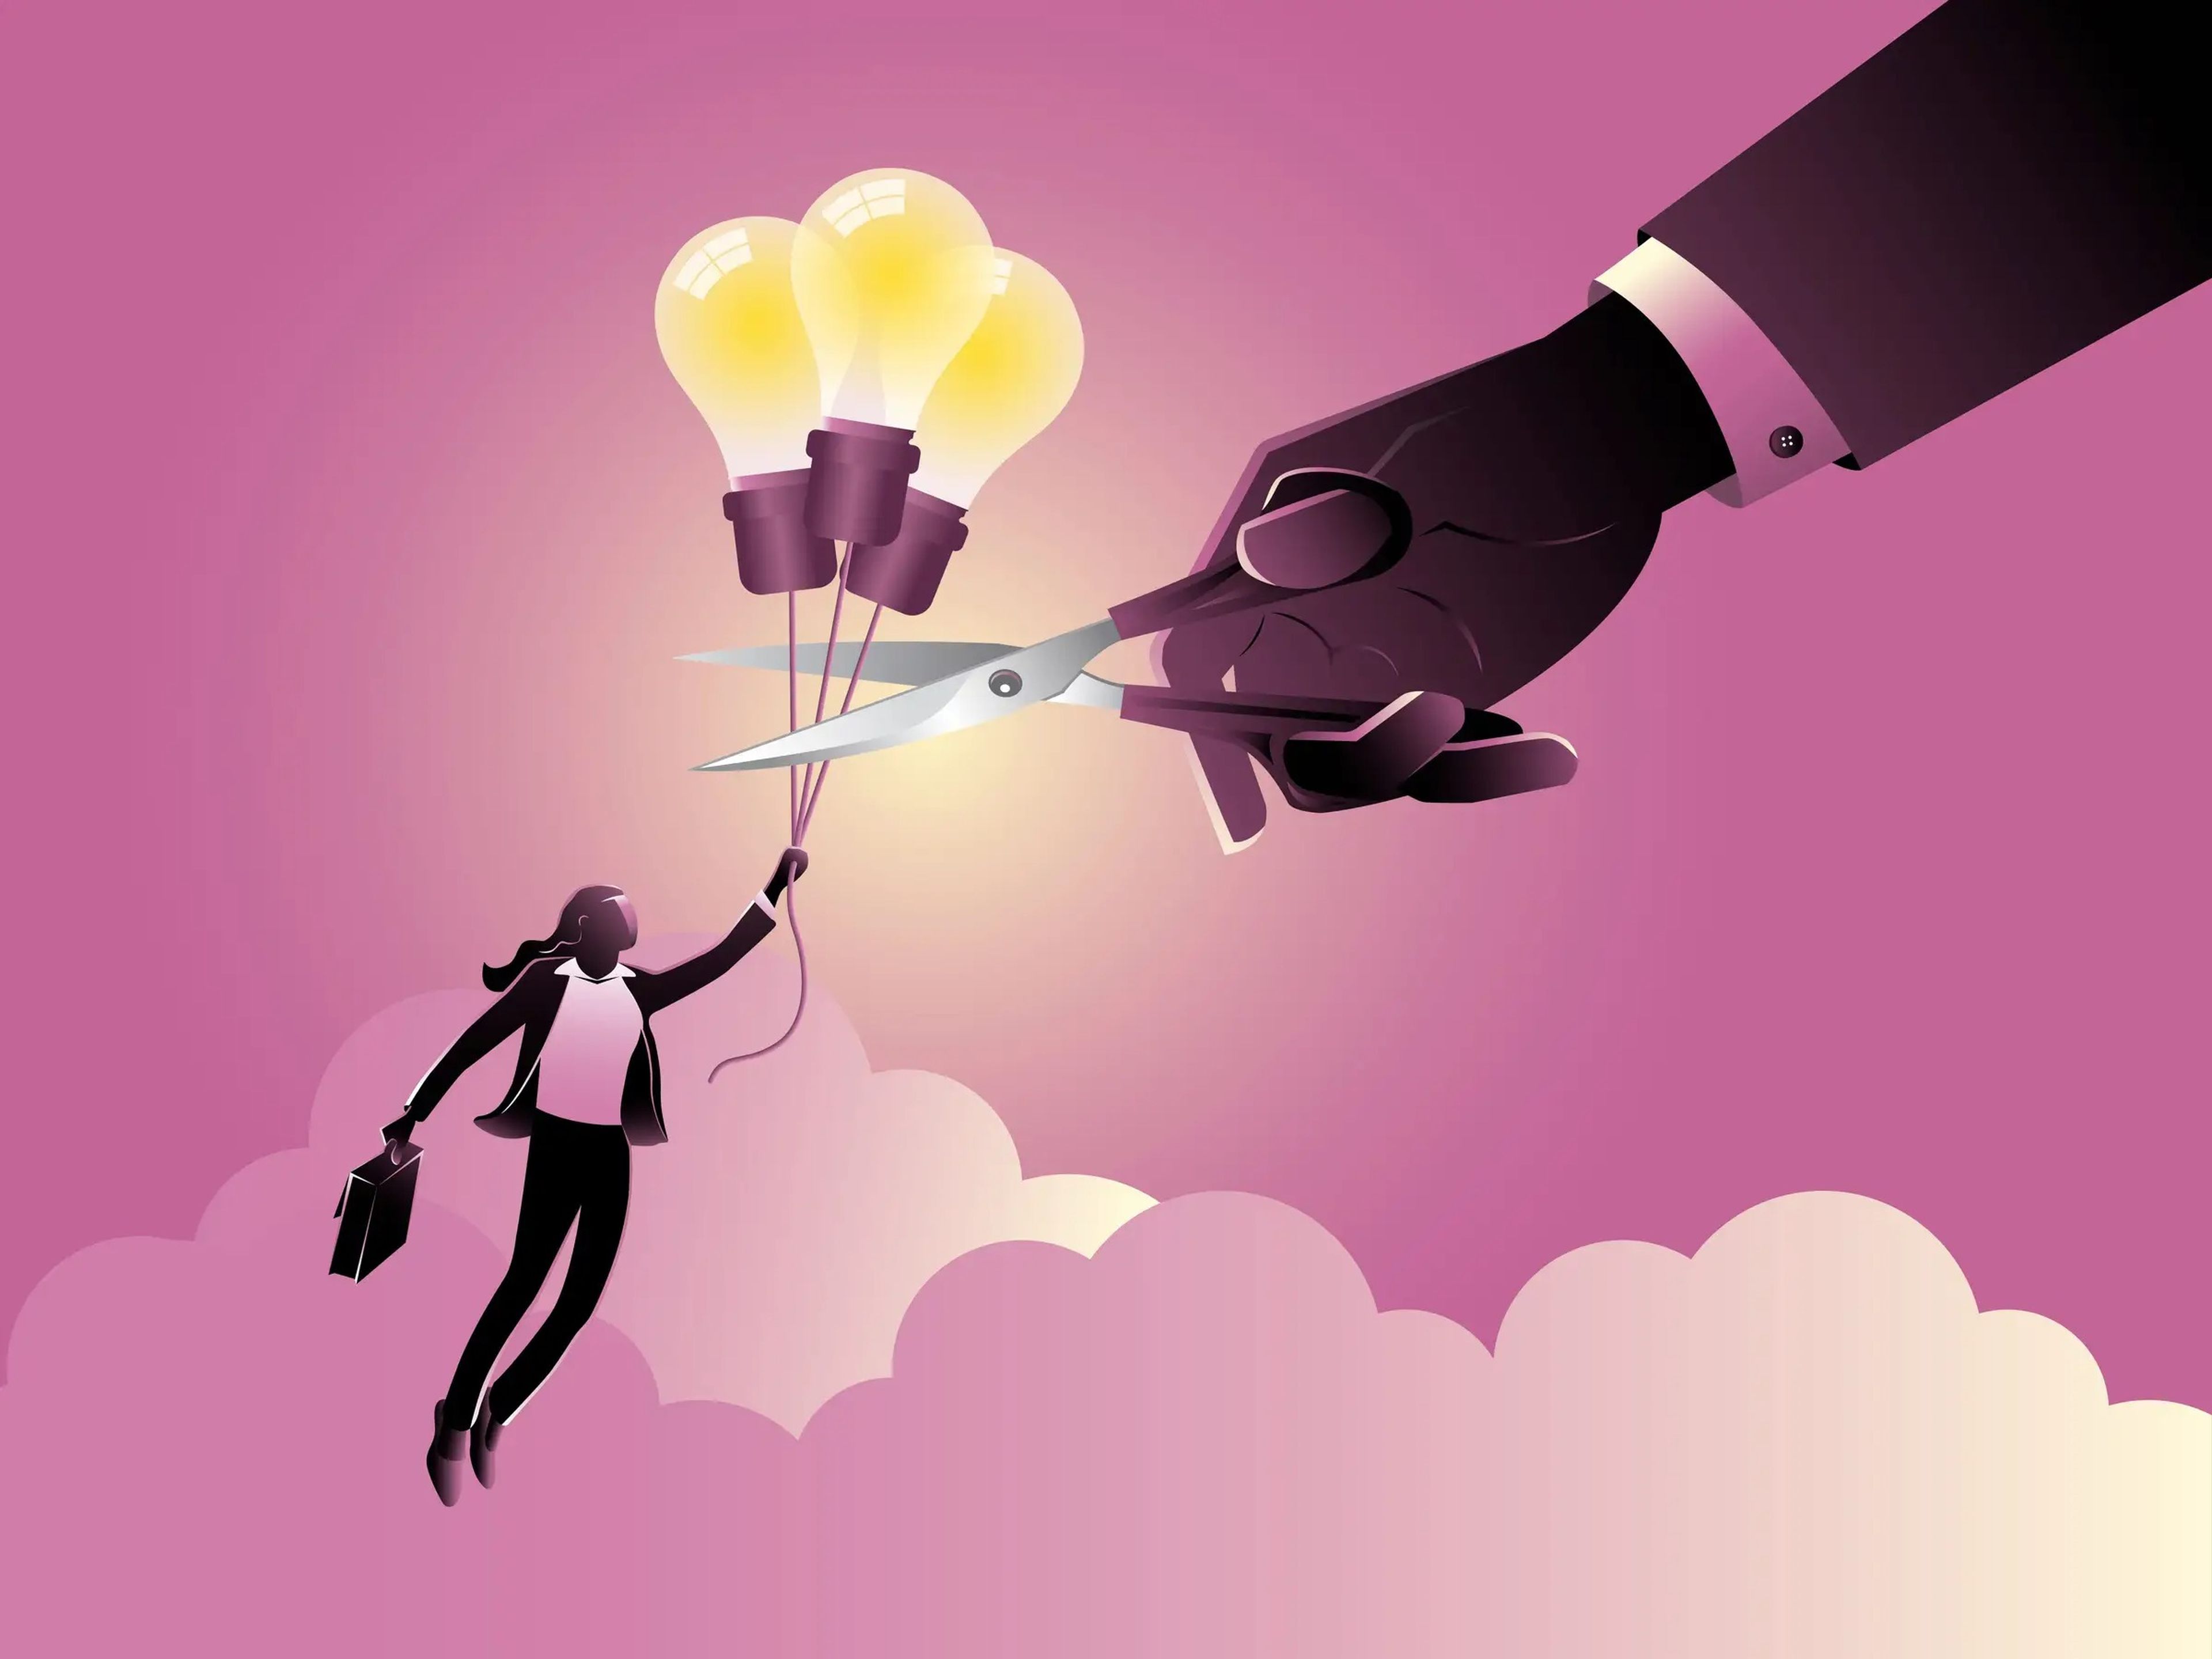 An illustration of a businesswoman holding a briefcase in one hand and balloons in the other, floating in the sky. A large hand holding a pair of scissors looms above her, poised to snip the strings of her balloons.